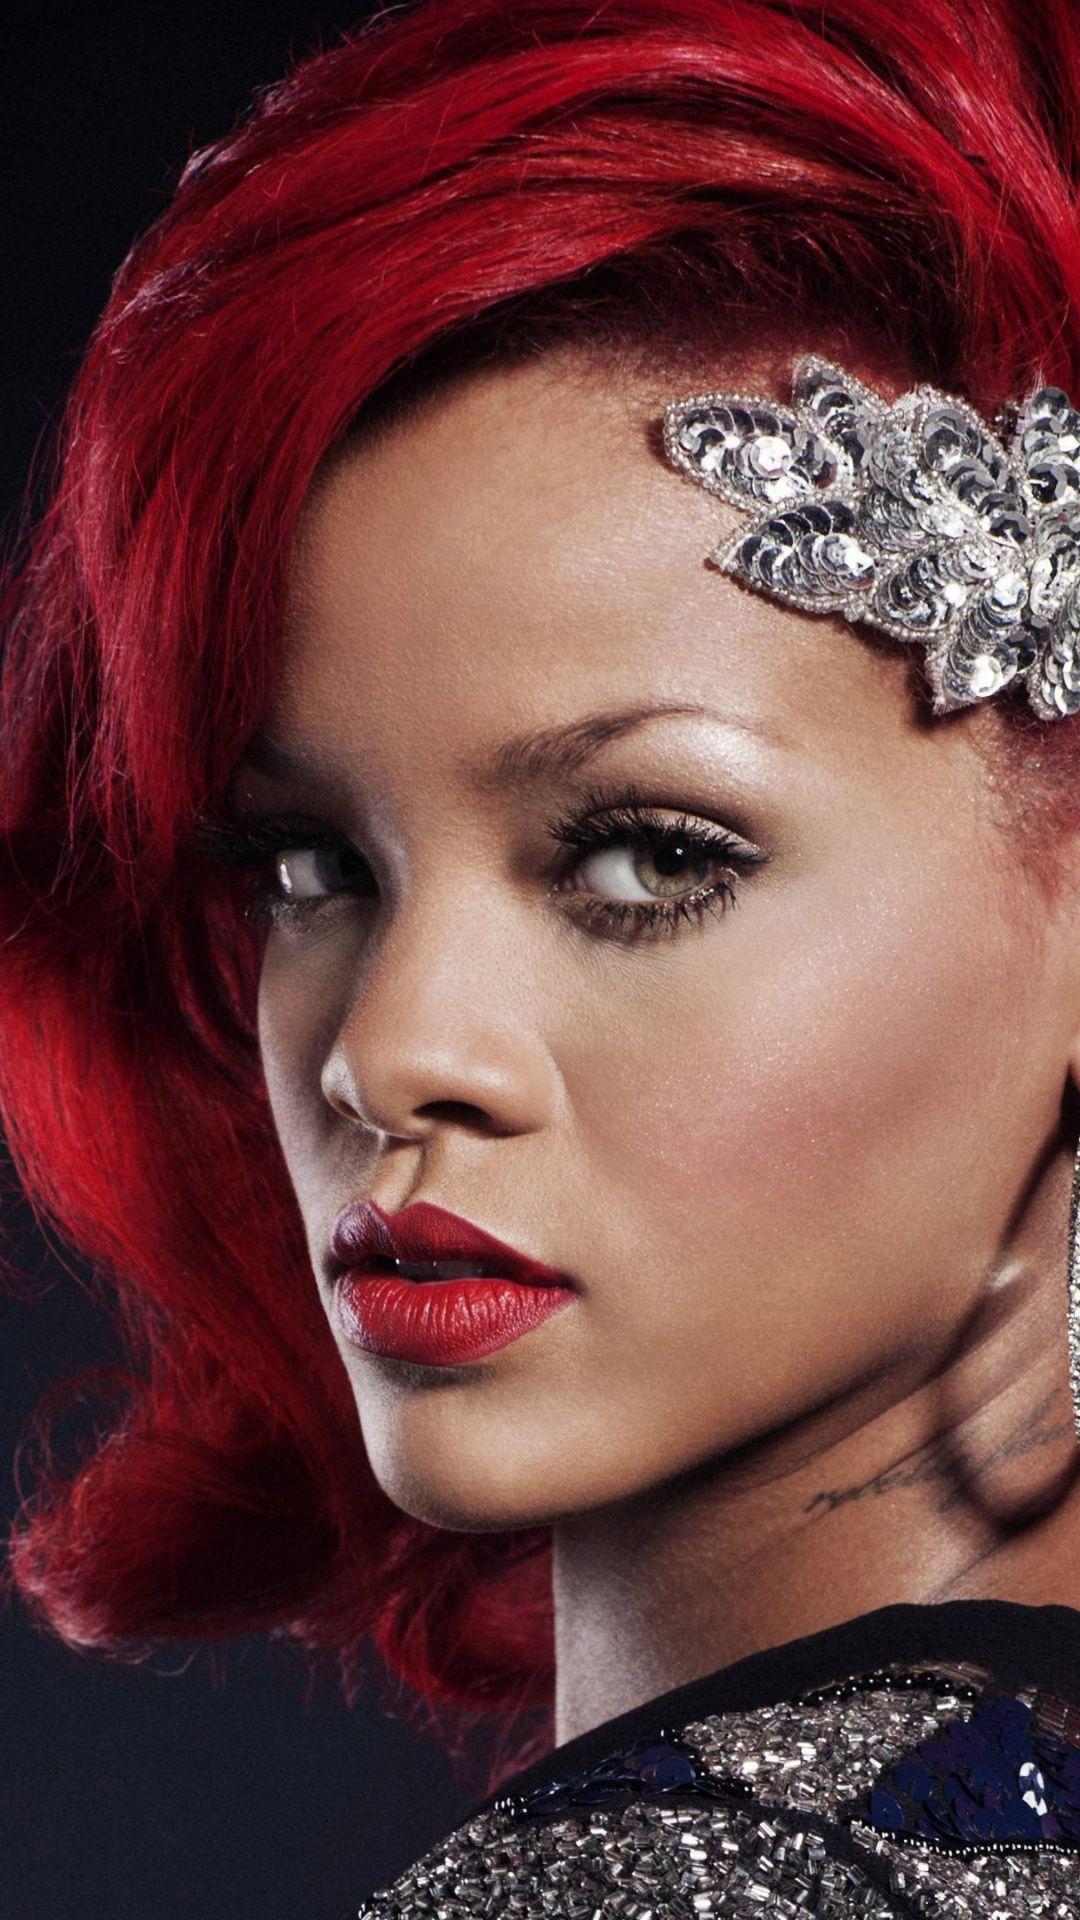 Rihanna, red colored hair, famous celebrity, singer wallpaper